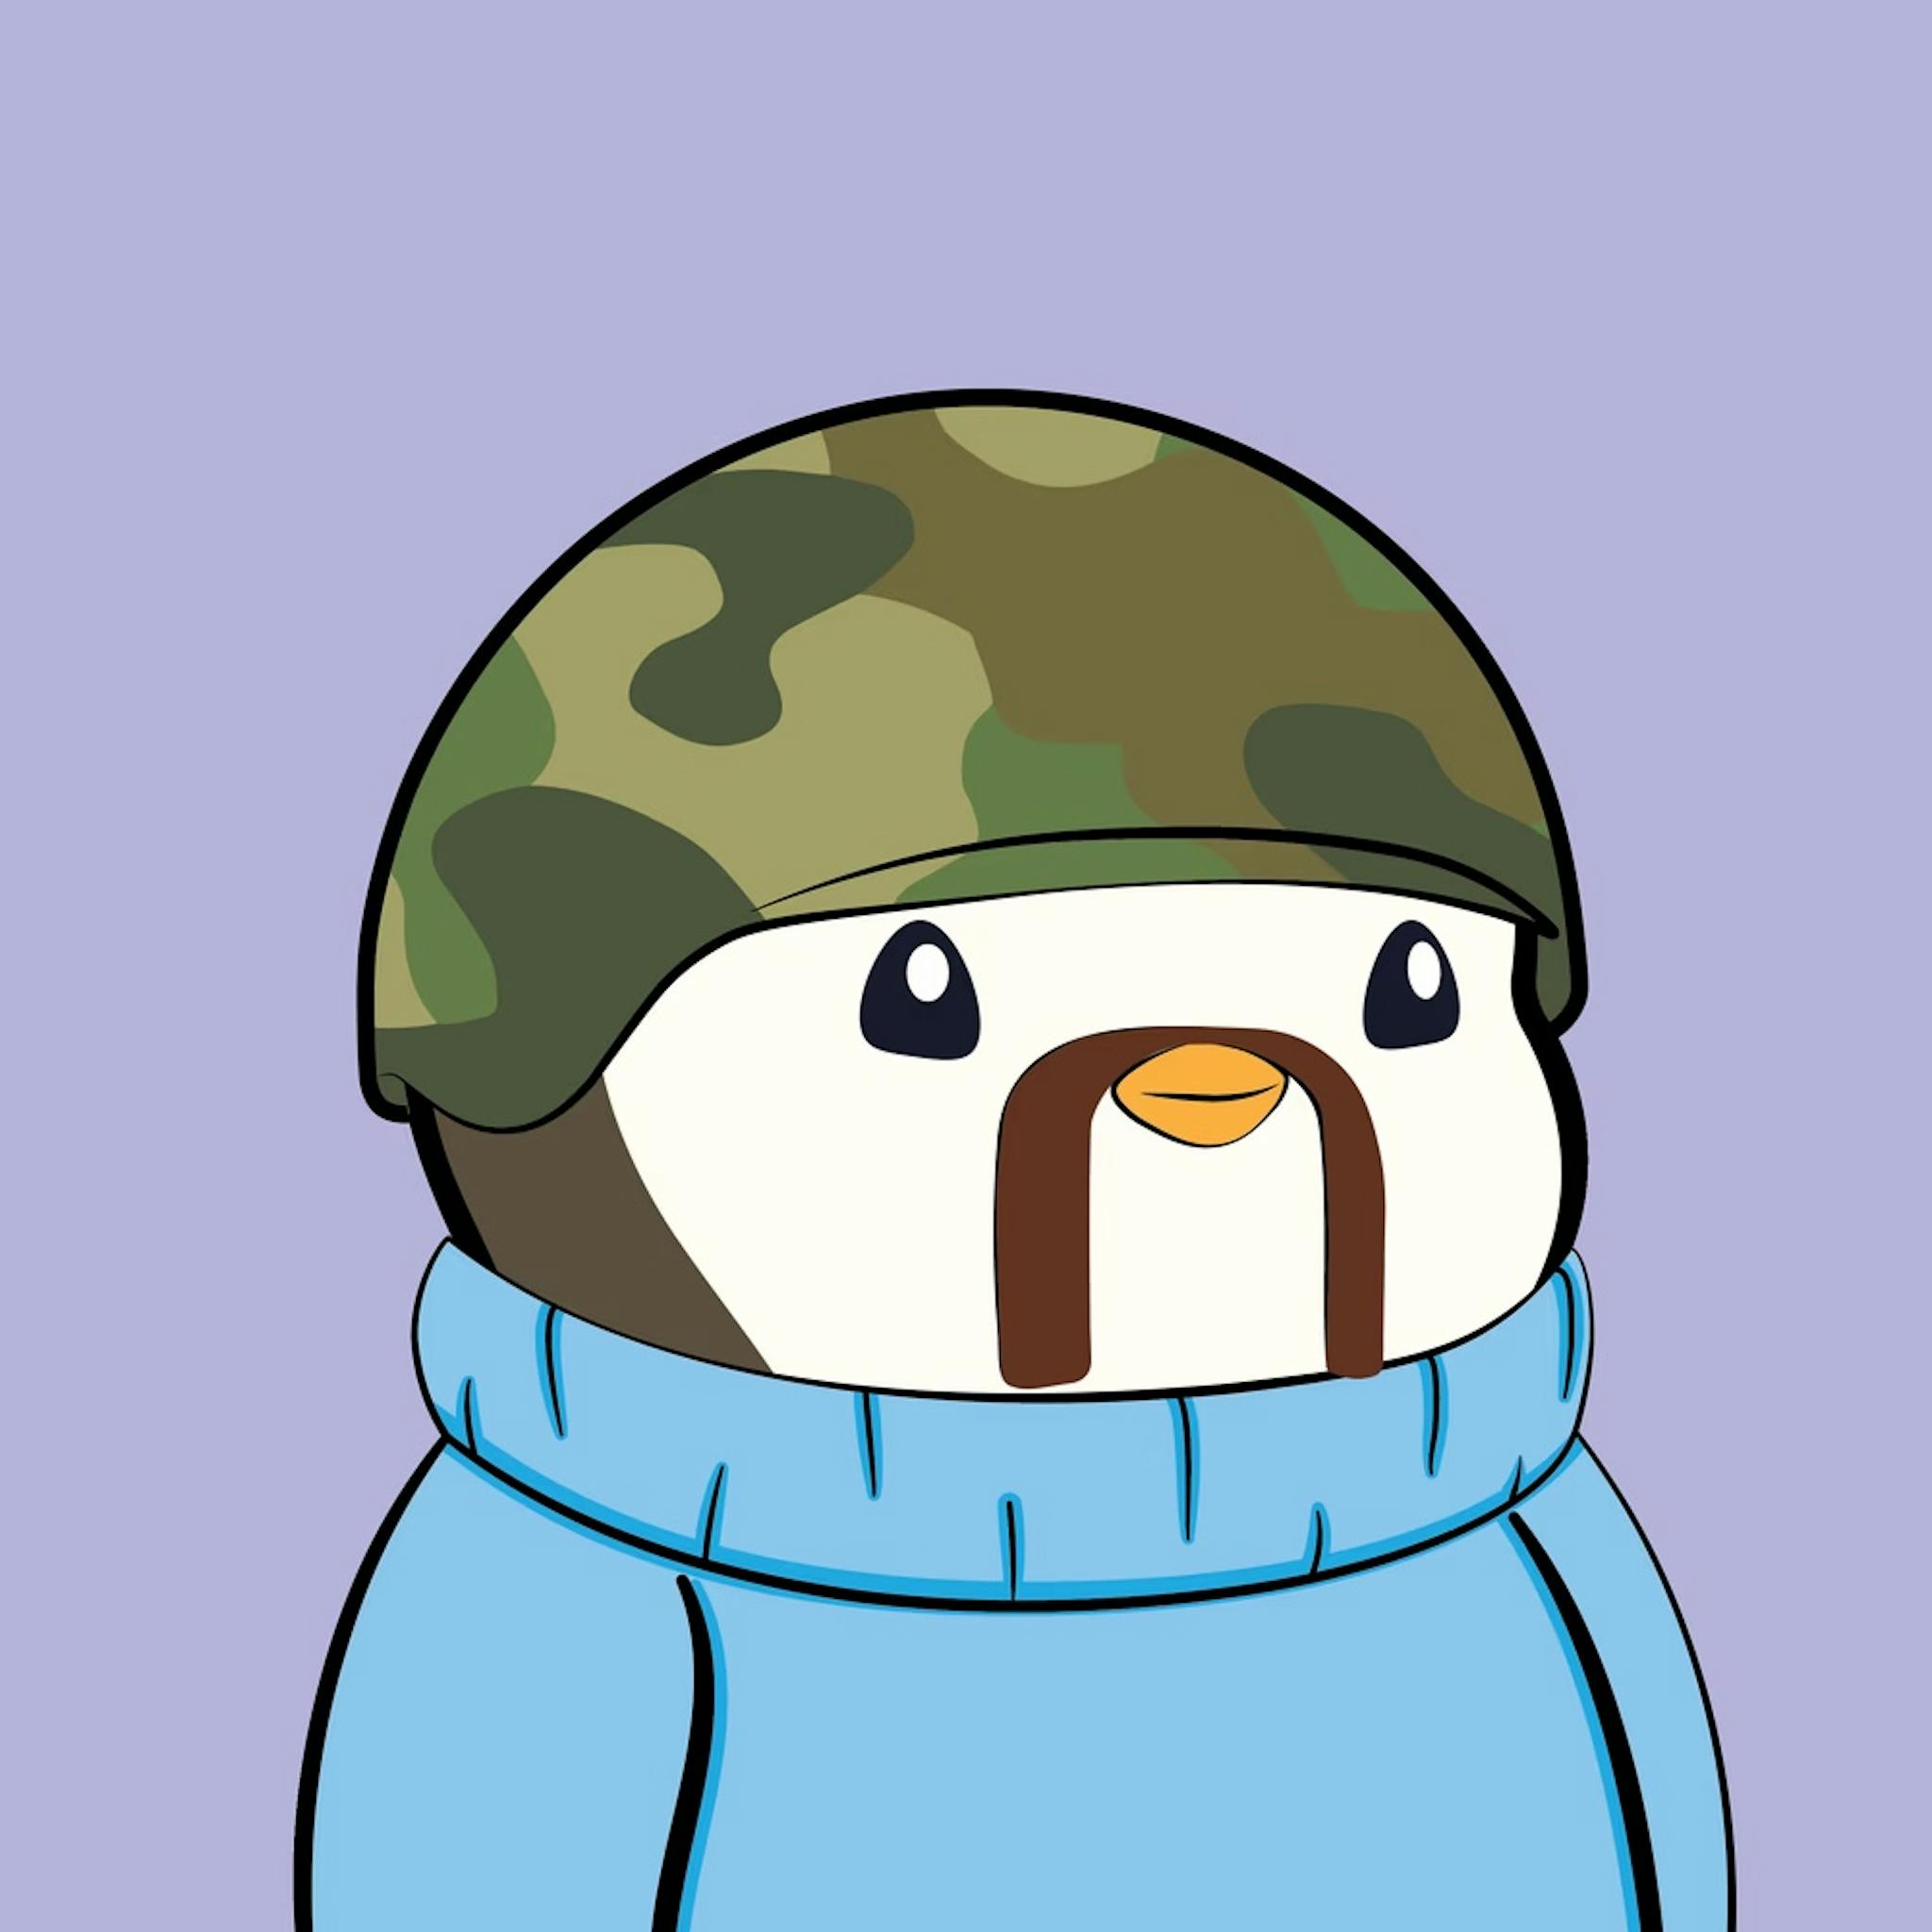  Pudgy Penguin #6796 (The first interaction with NFTs)